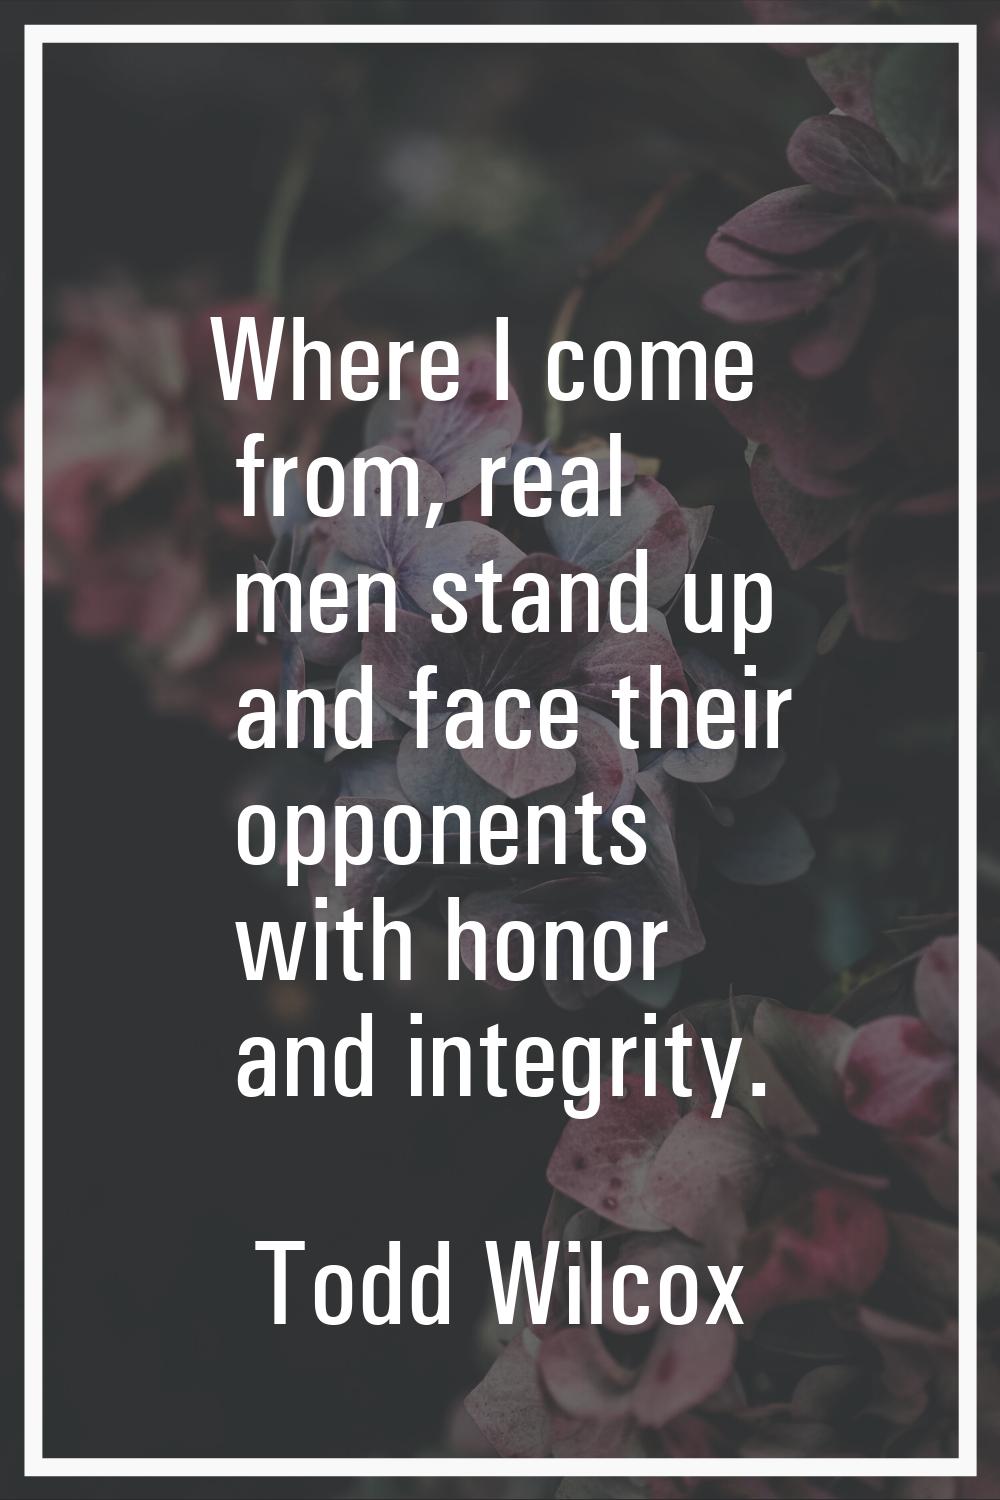 Where I come from, real men stand up and face their opponents with honor and integrity.